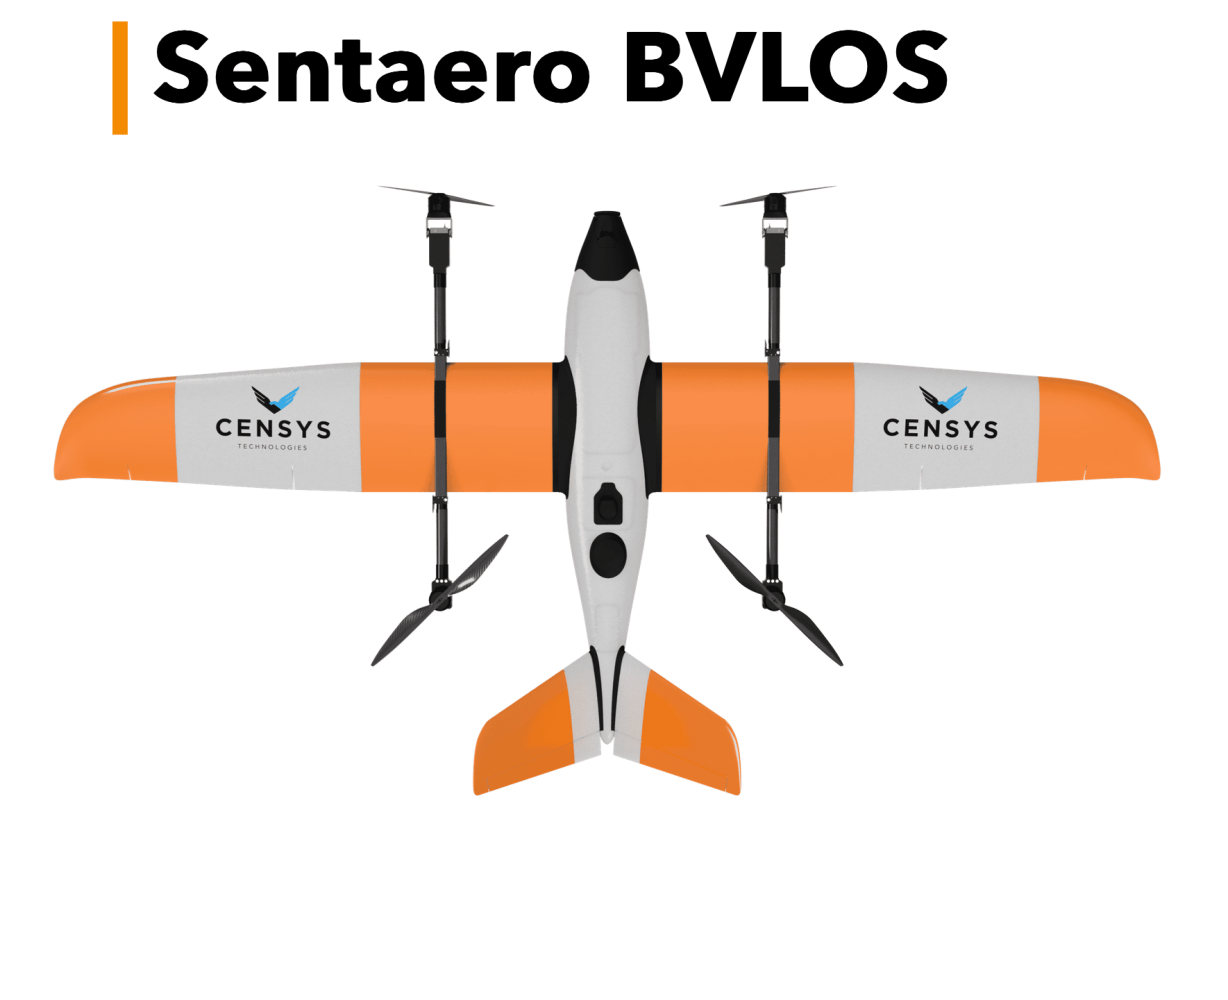 Censys drone